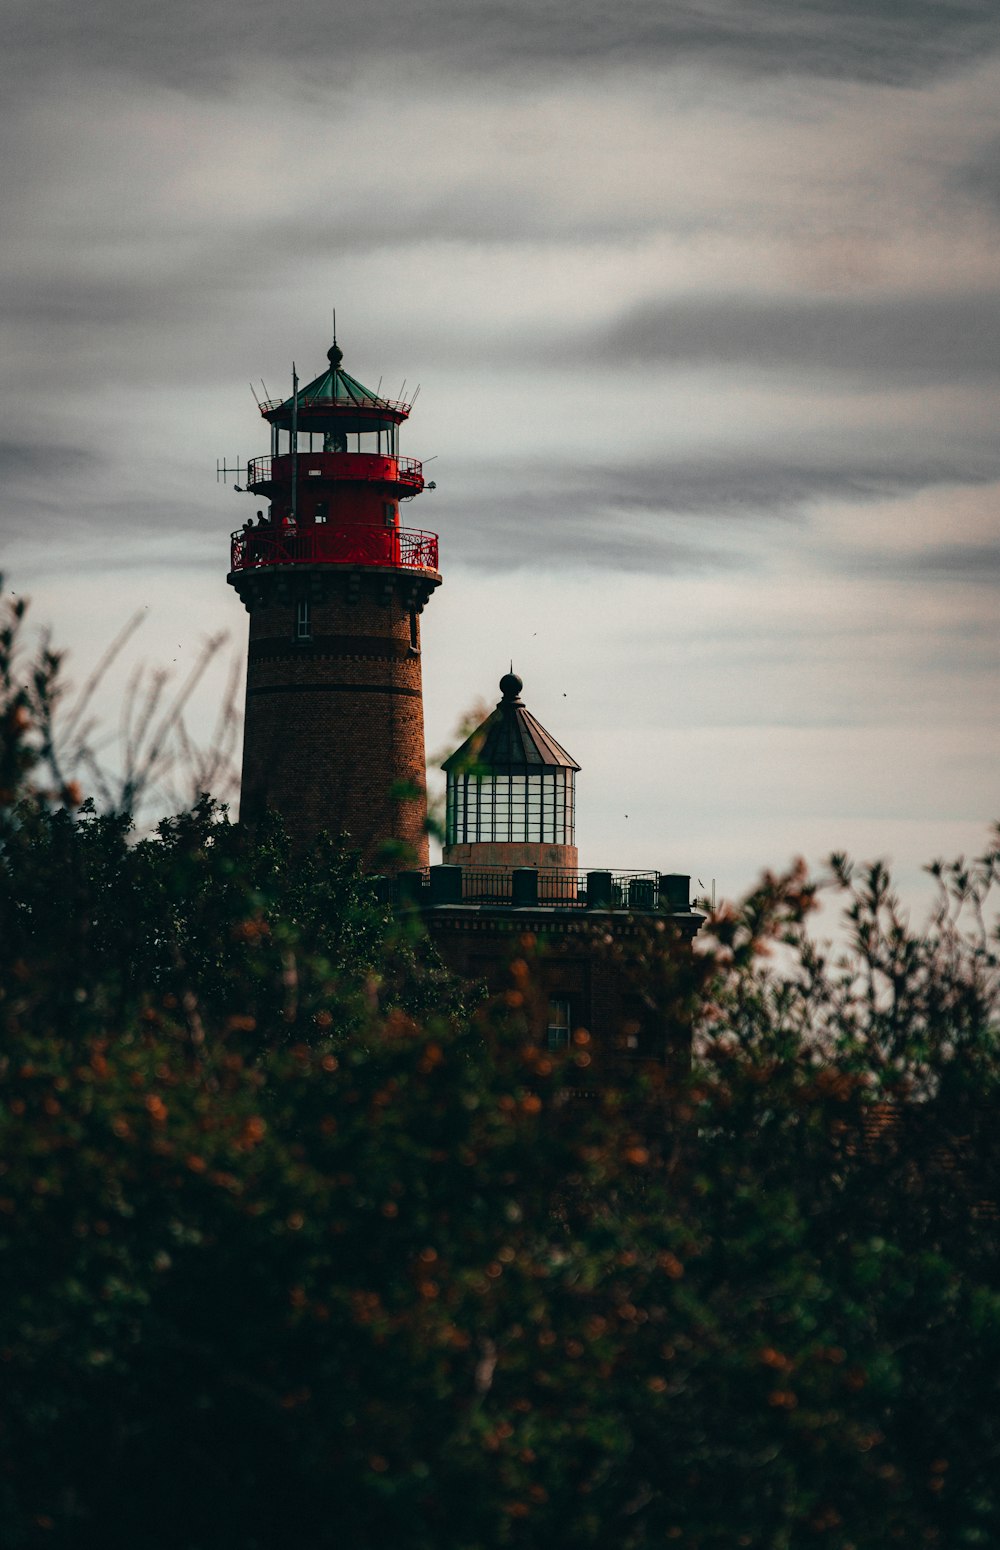 red and white lighthouse near green trees under cloudy sky during daytime